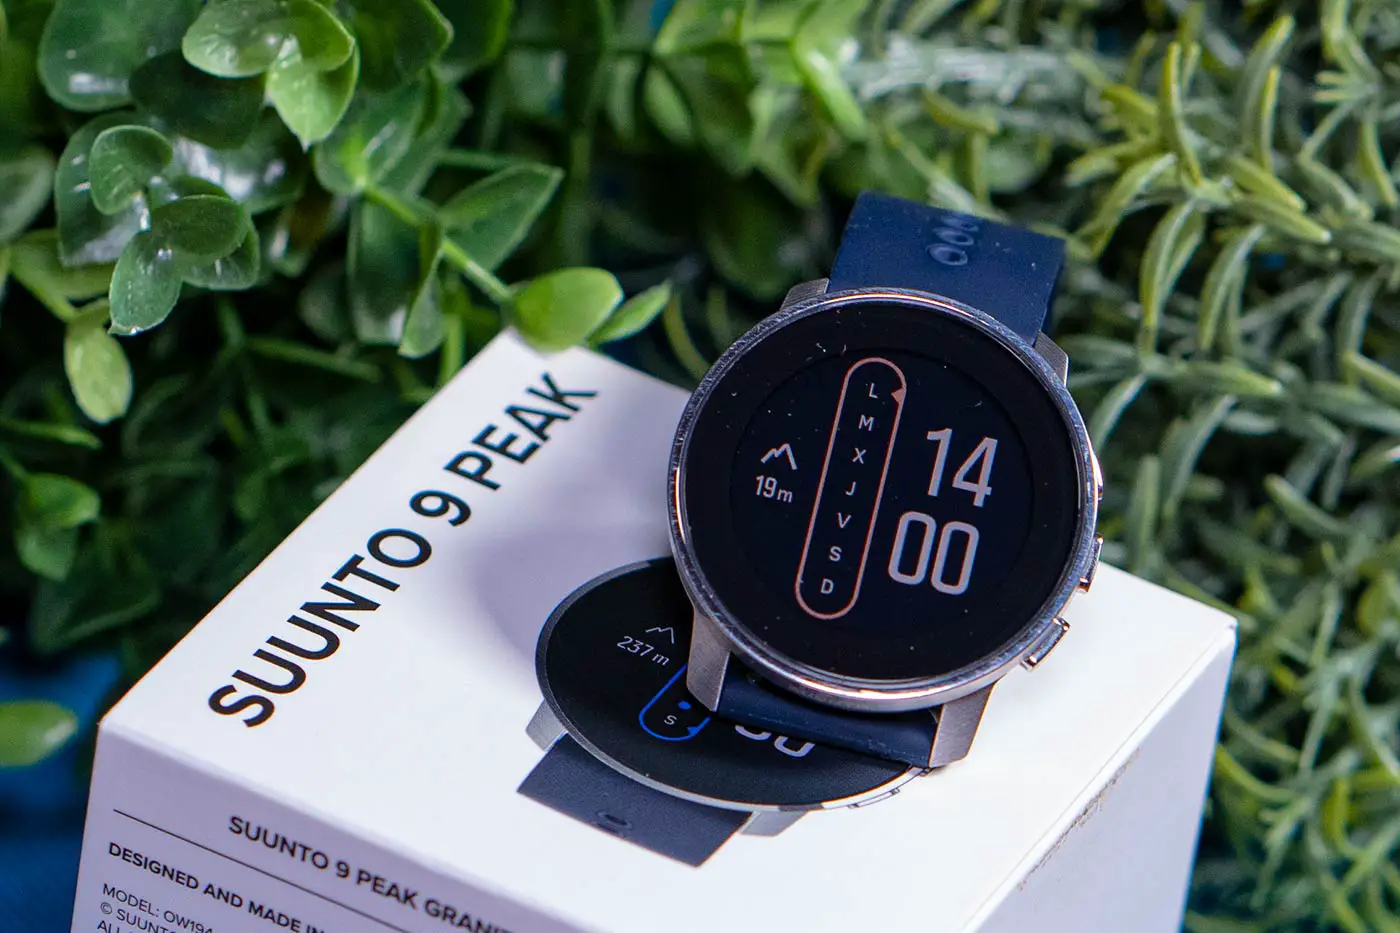 Suunto 9 Peak | Review, features and operation